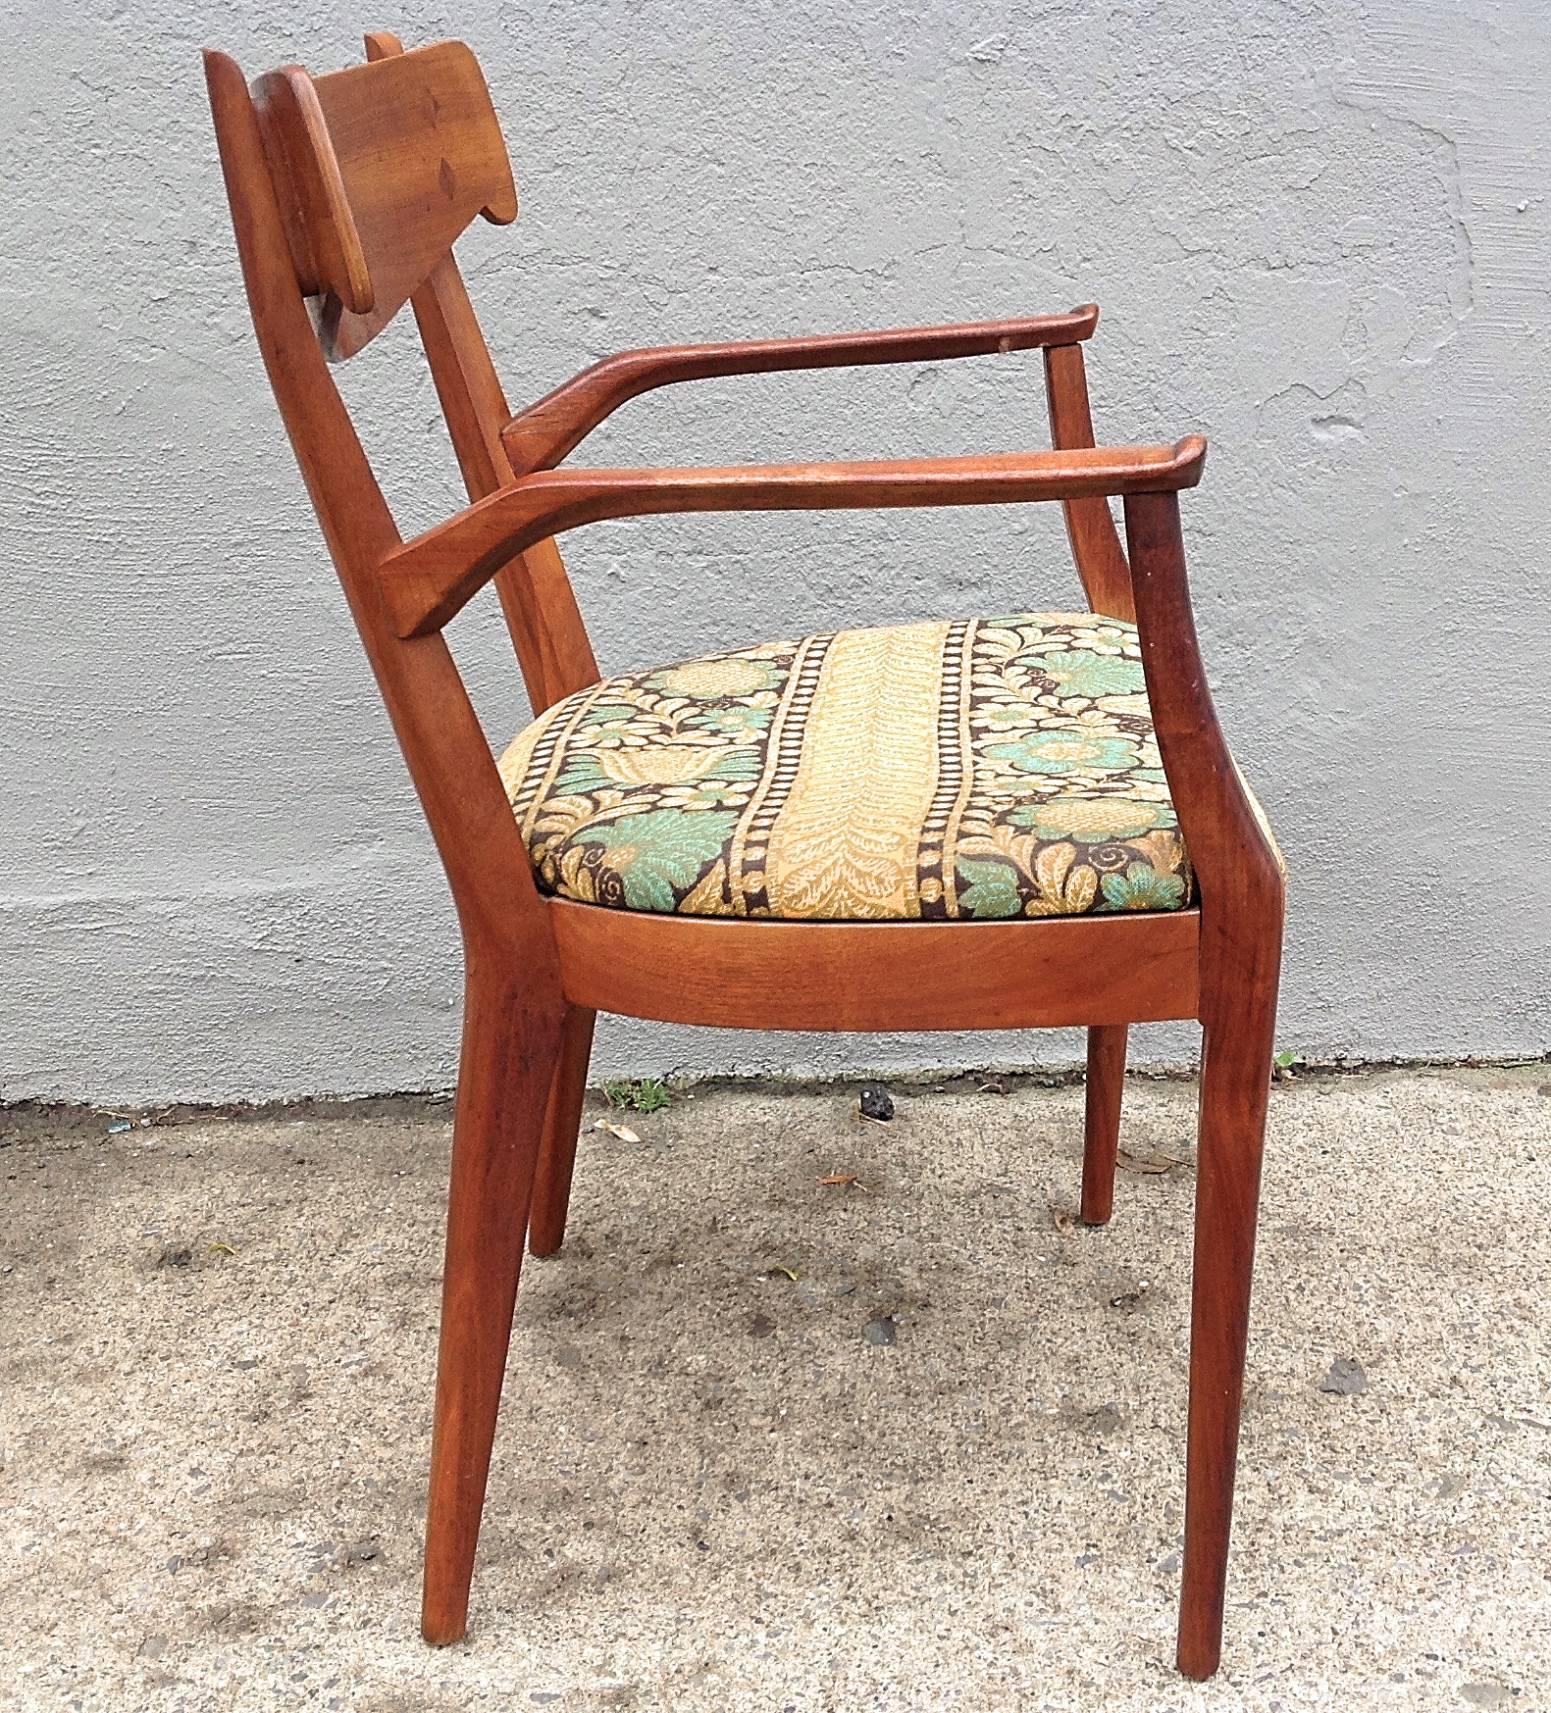 Graceful lines adorn these walnut dining chairs design by Kipp Stewart and Stuart MacDougall for Drexel, circa 1950. Set consists of two armchairs in vintage cotton tapestry and six side chairs in original white naugahyde. Very good vintage